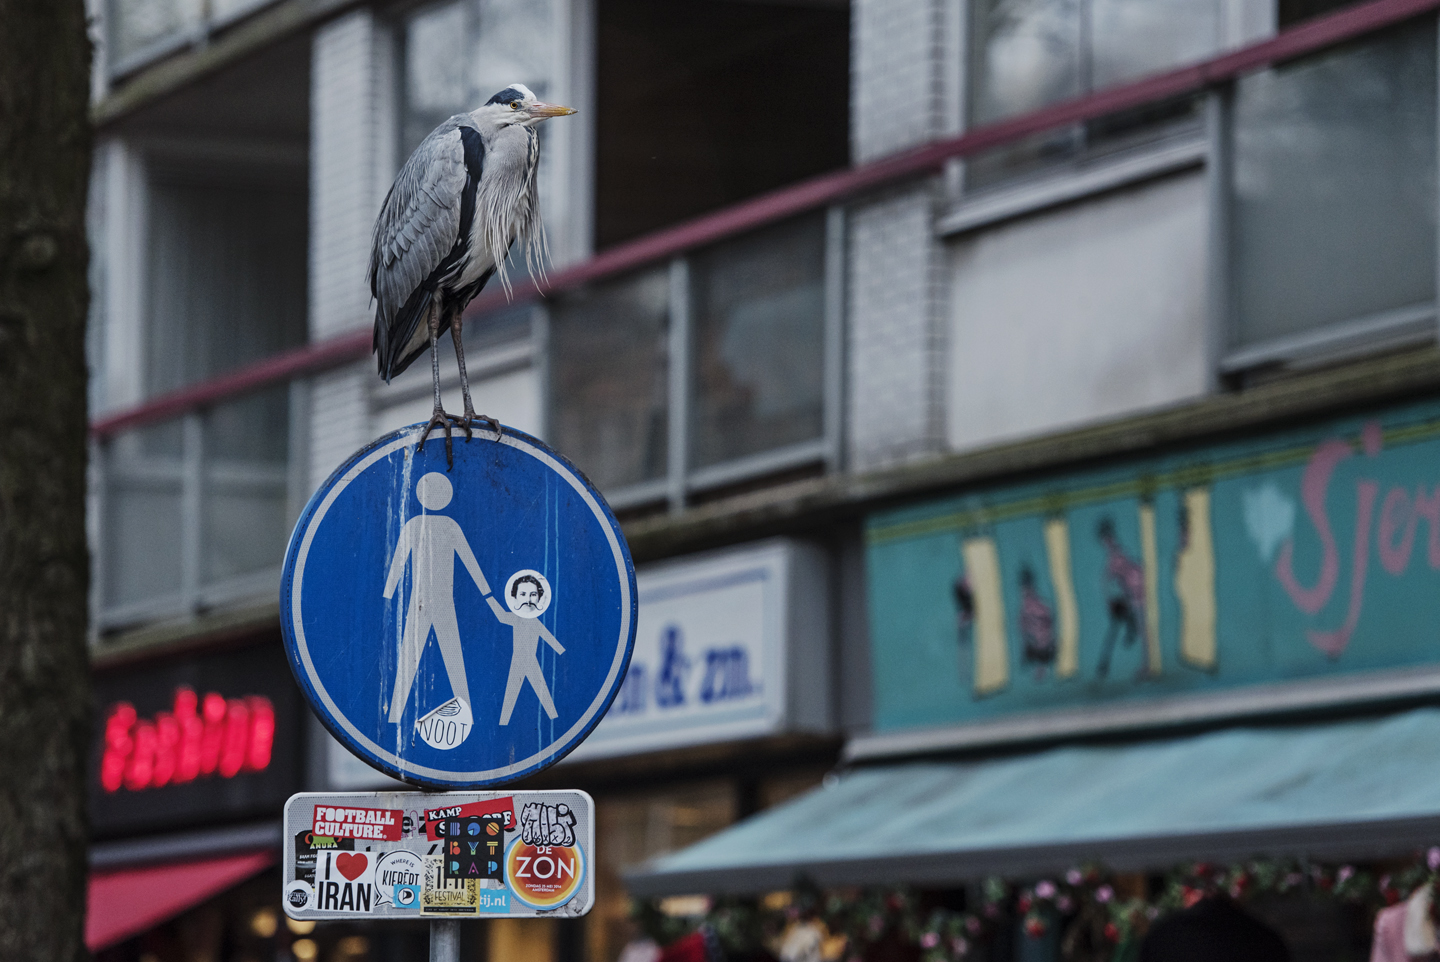  The herons have adapted so well to city life, that they now know all of the best places to sit in wait for a free meal 